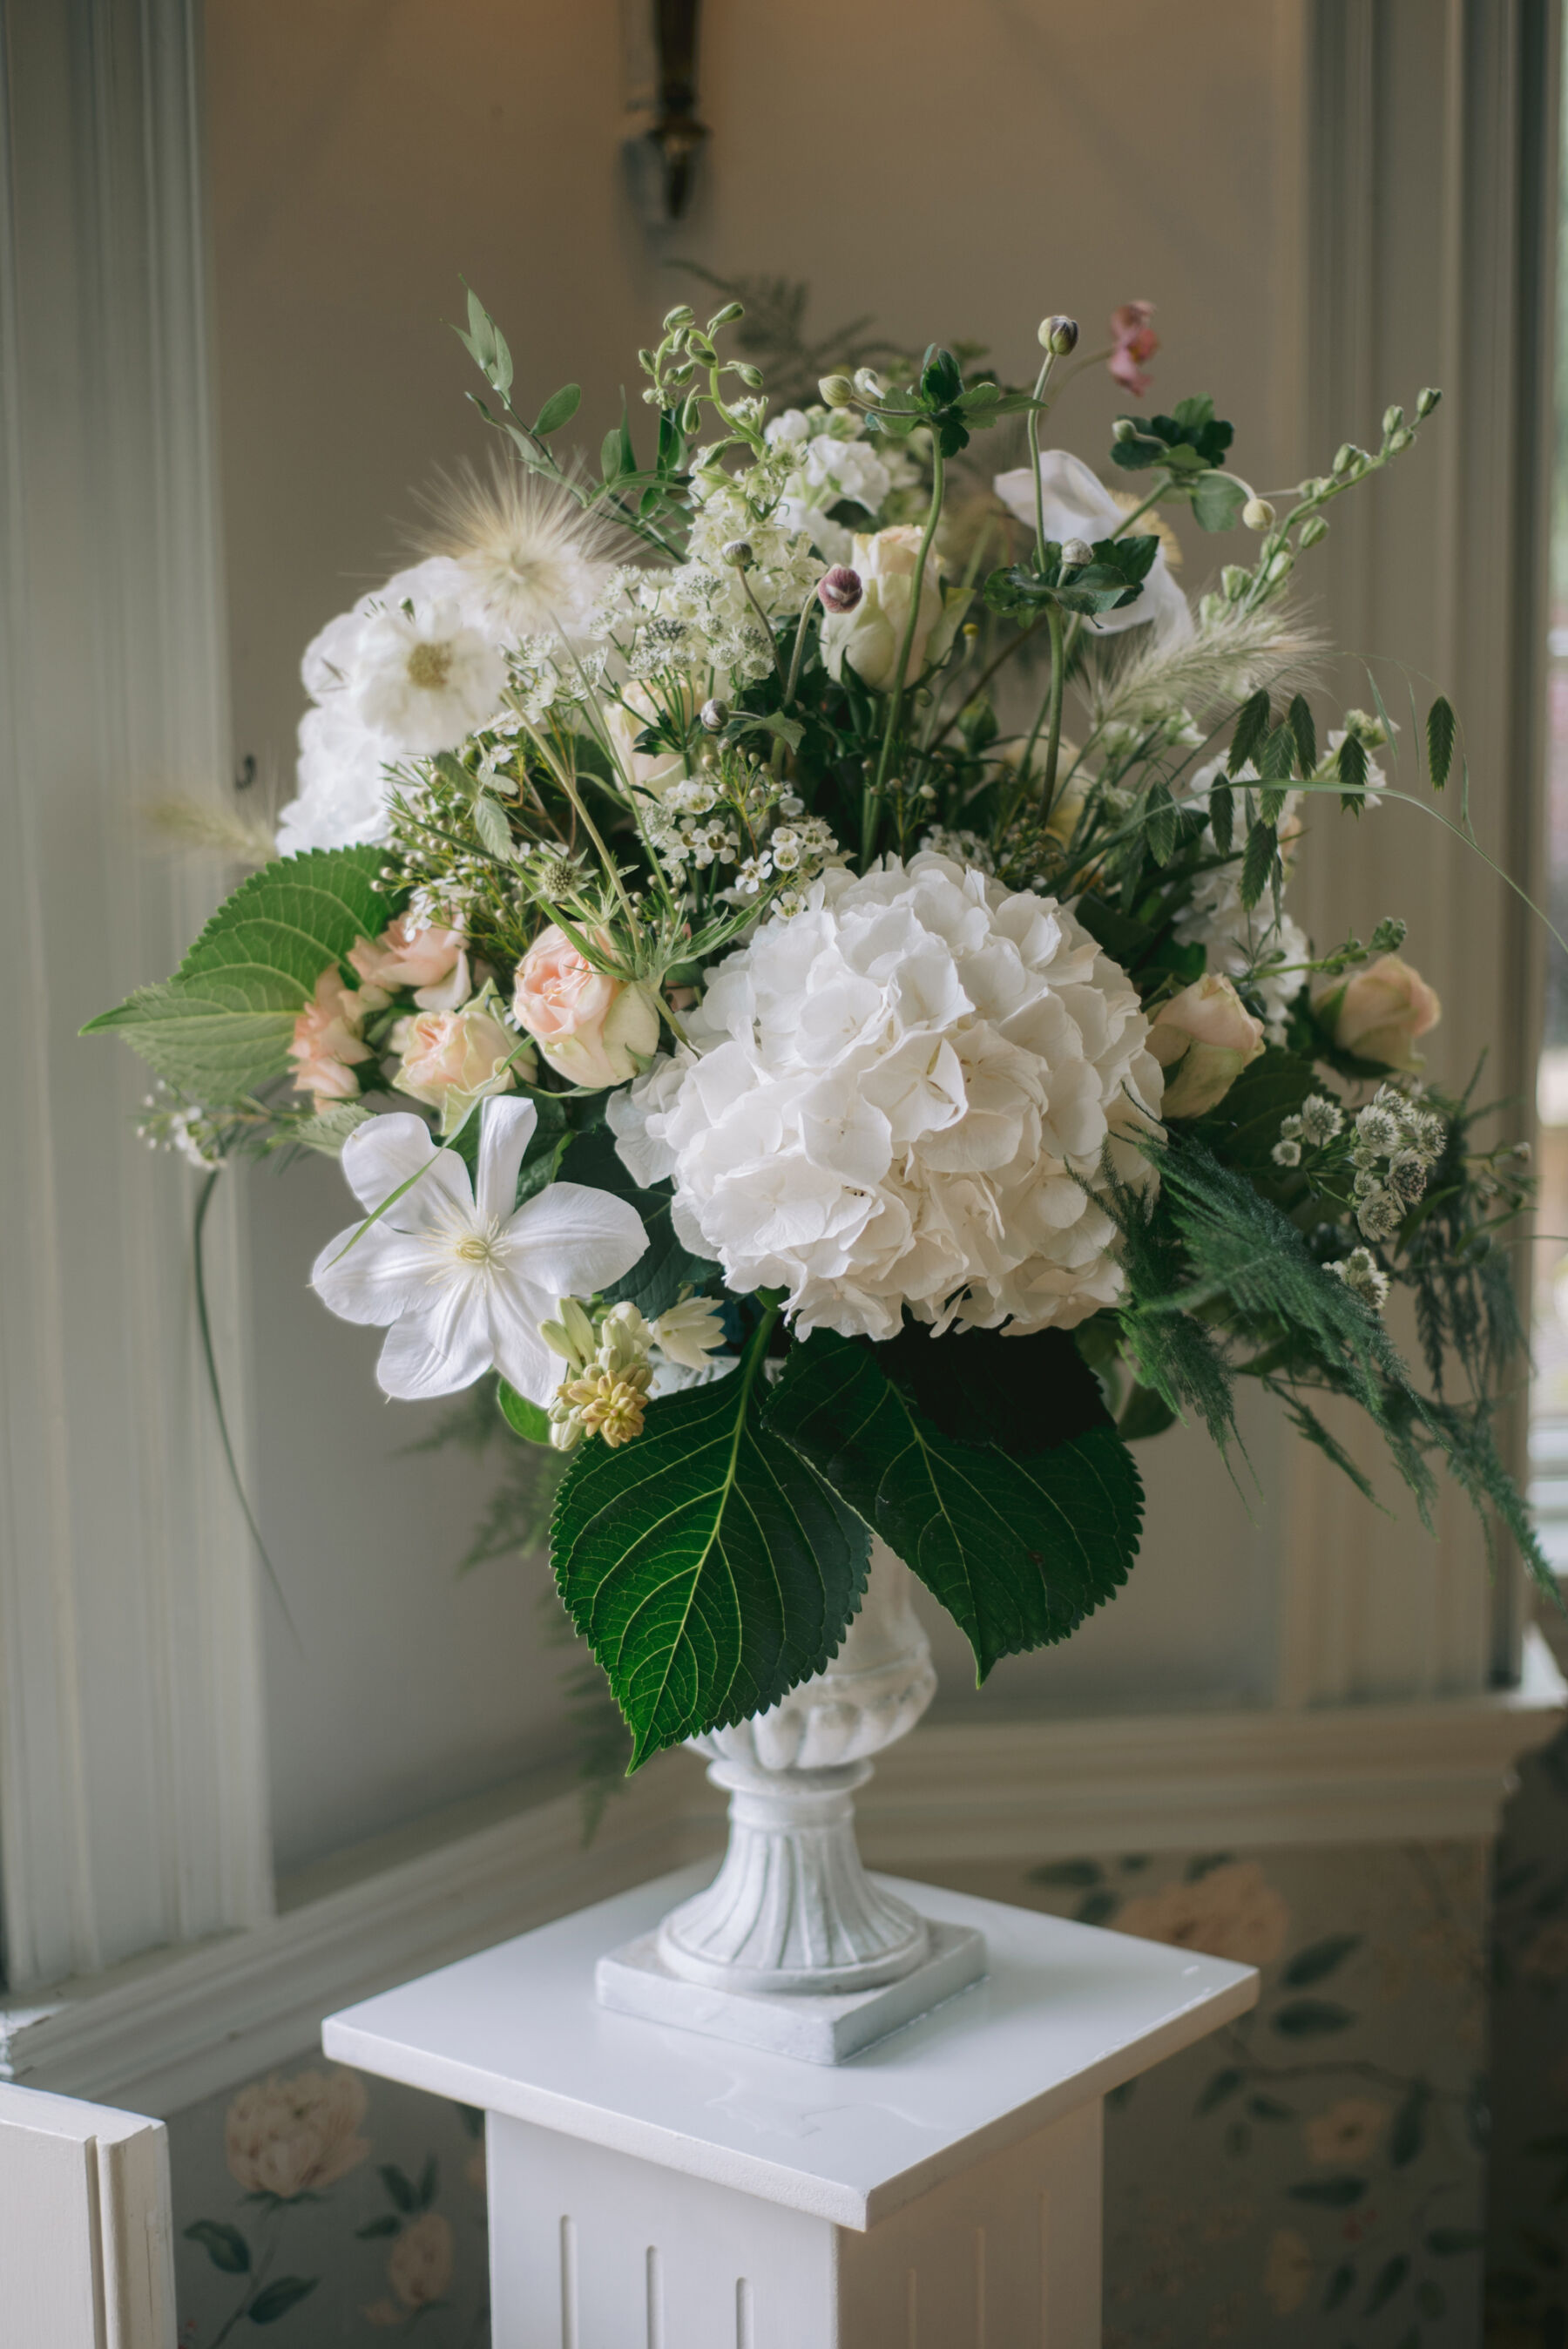 All green and white wedding flowers in a footed bowl vase.